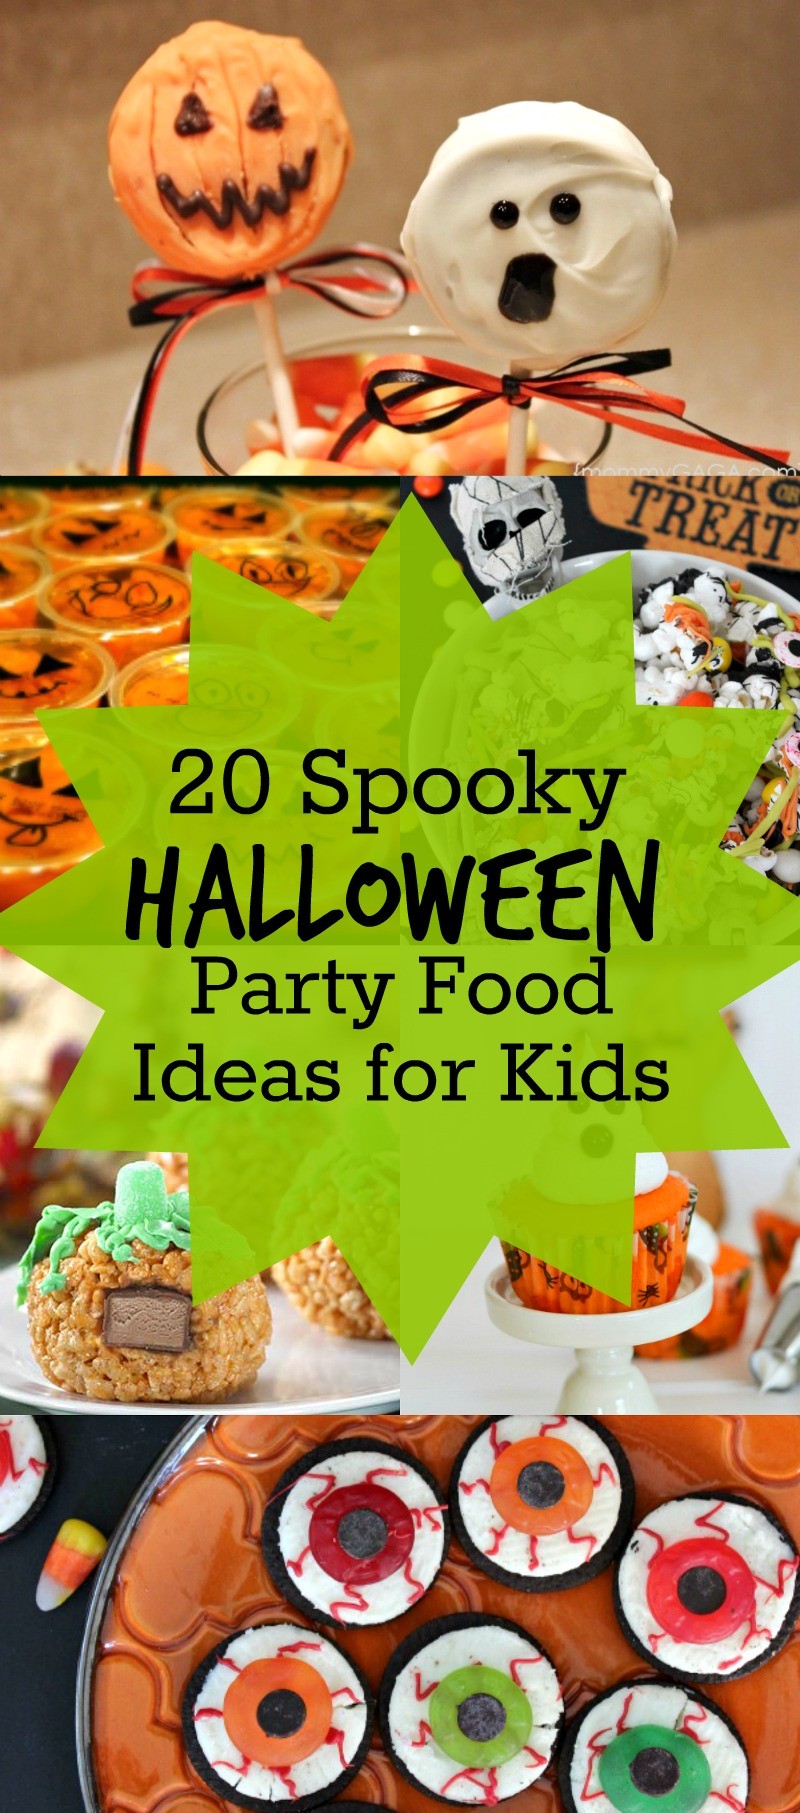 20 Spooky Halloween Party Food Ideas for Kids, Such cute and creepy